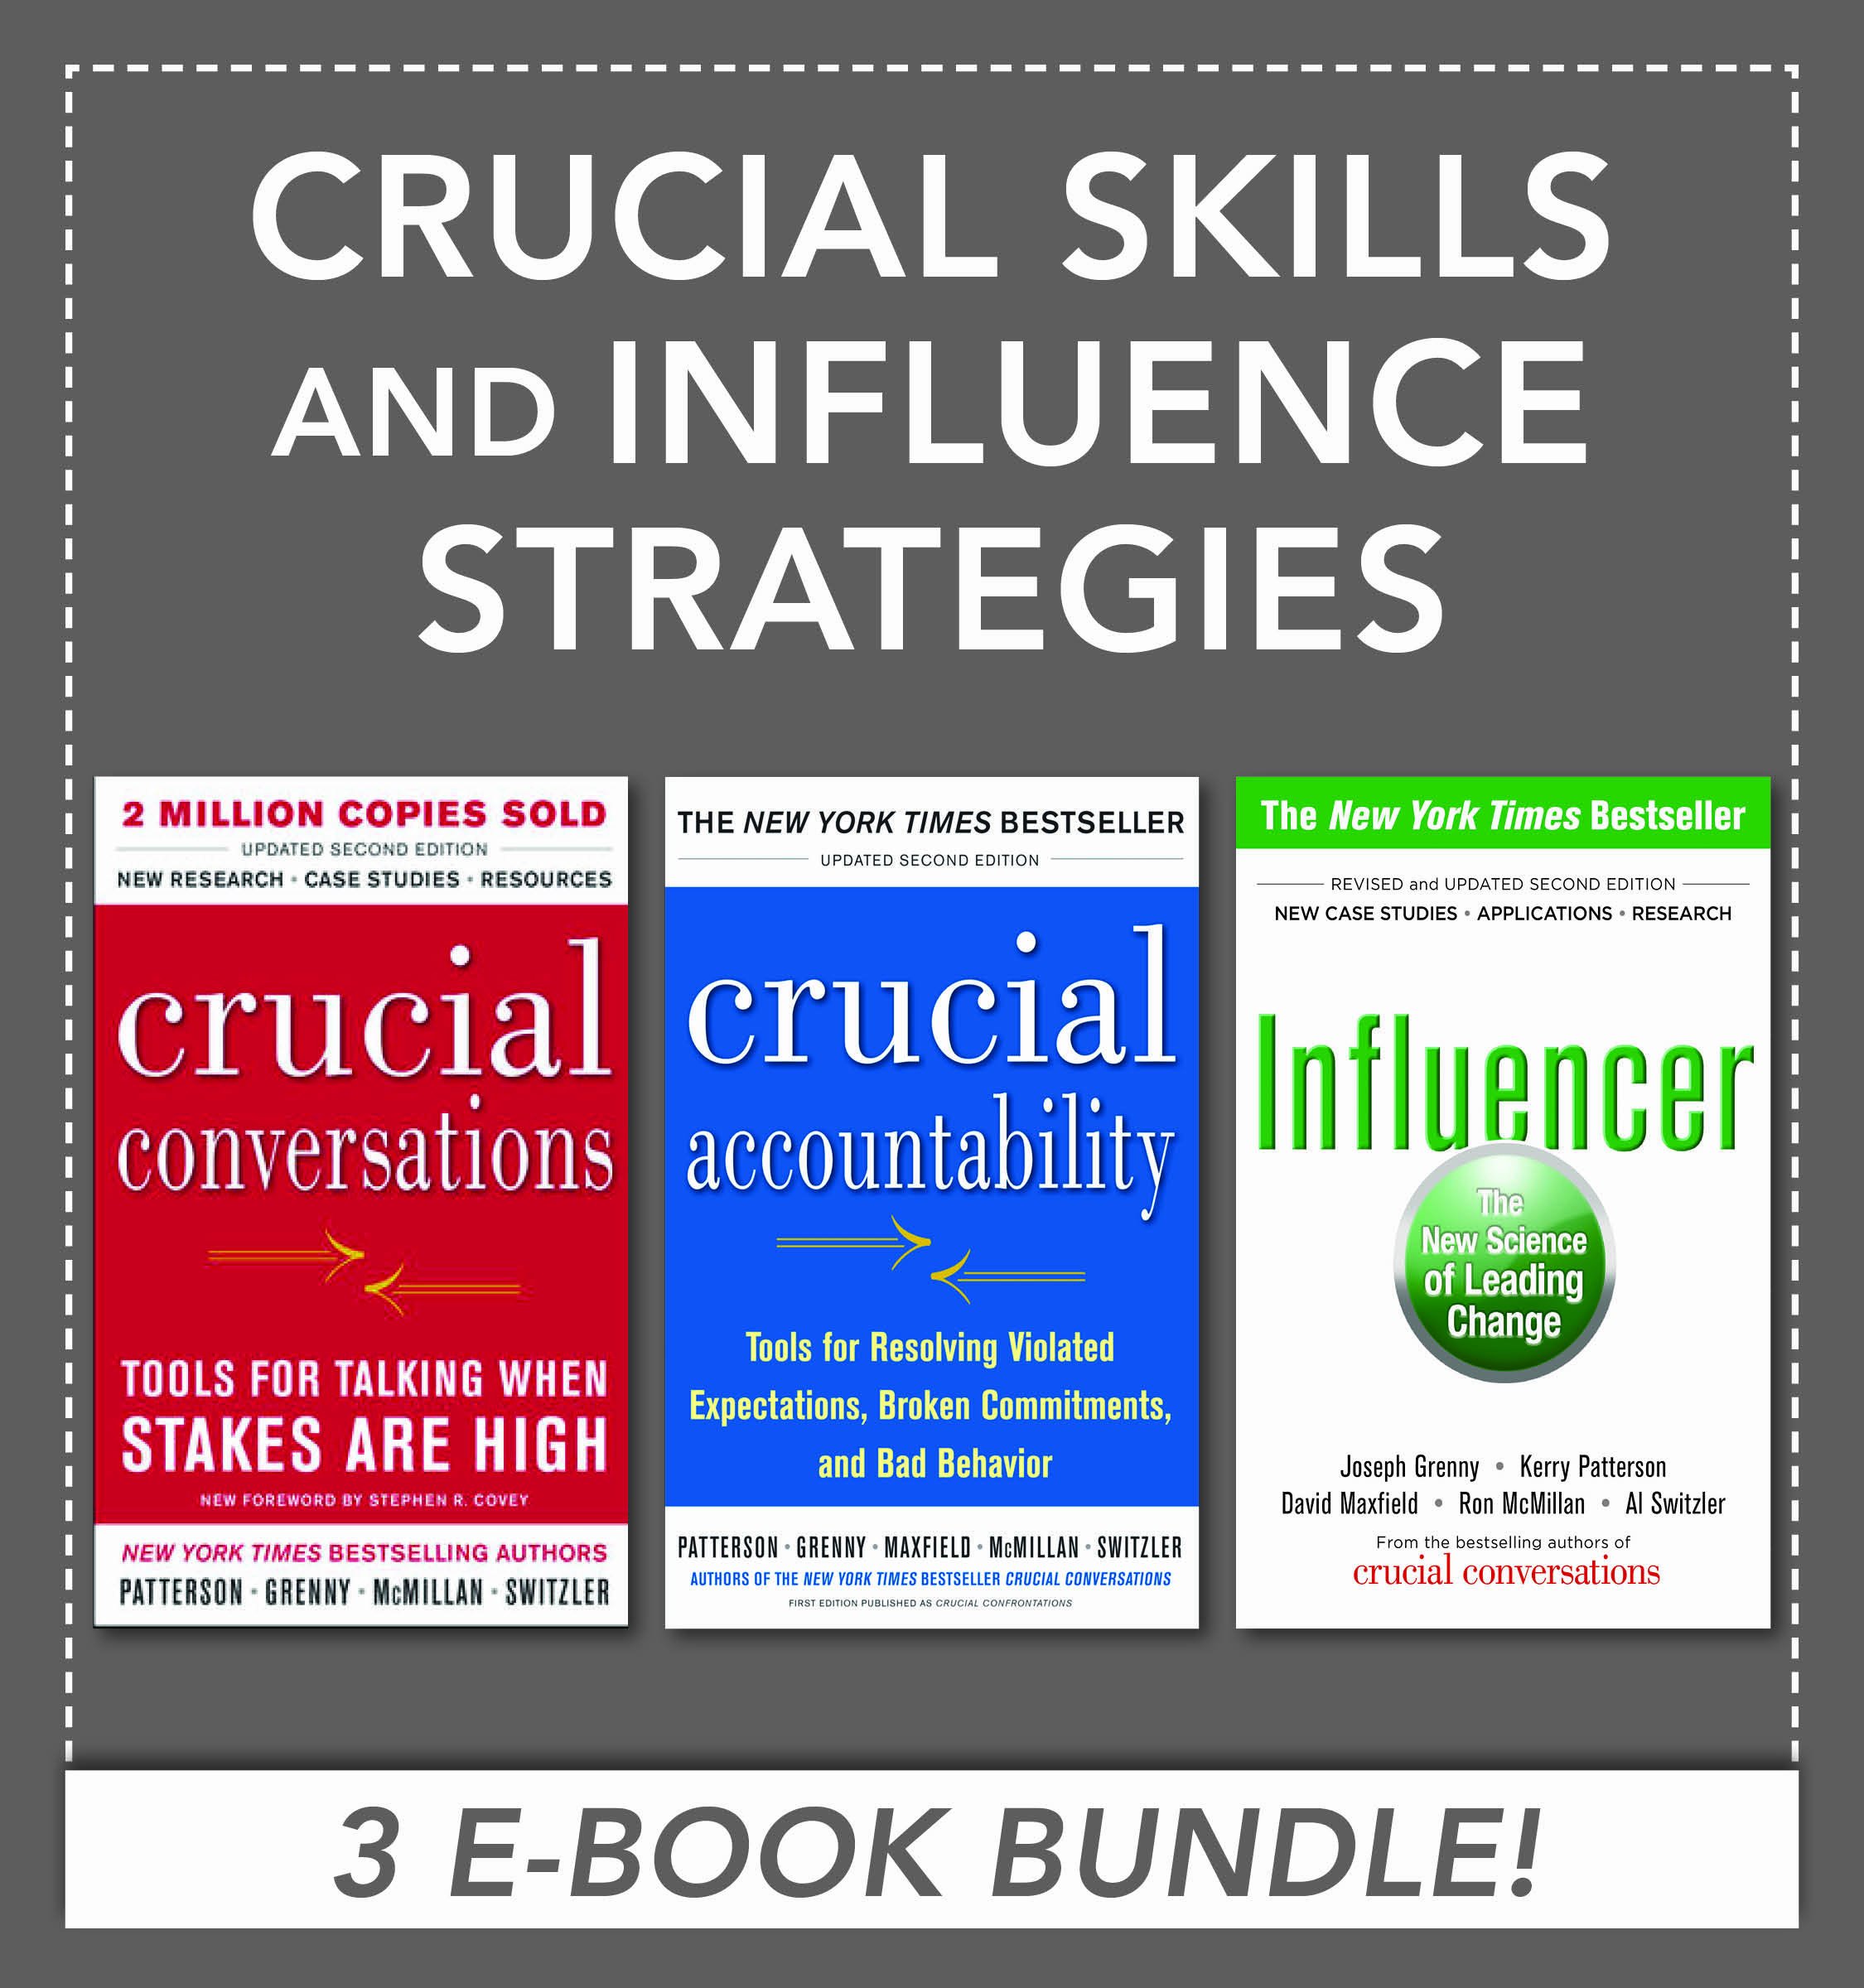 Crucial Skills and Influence Strategies